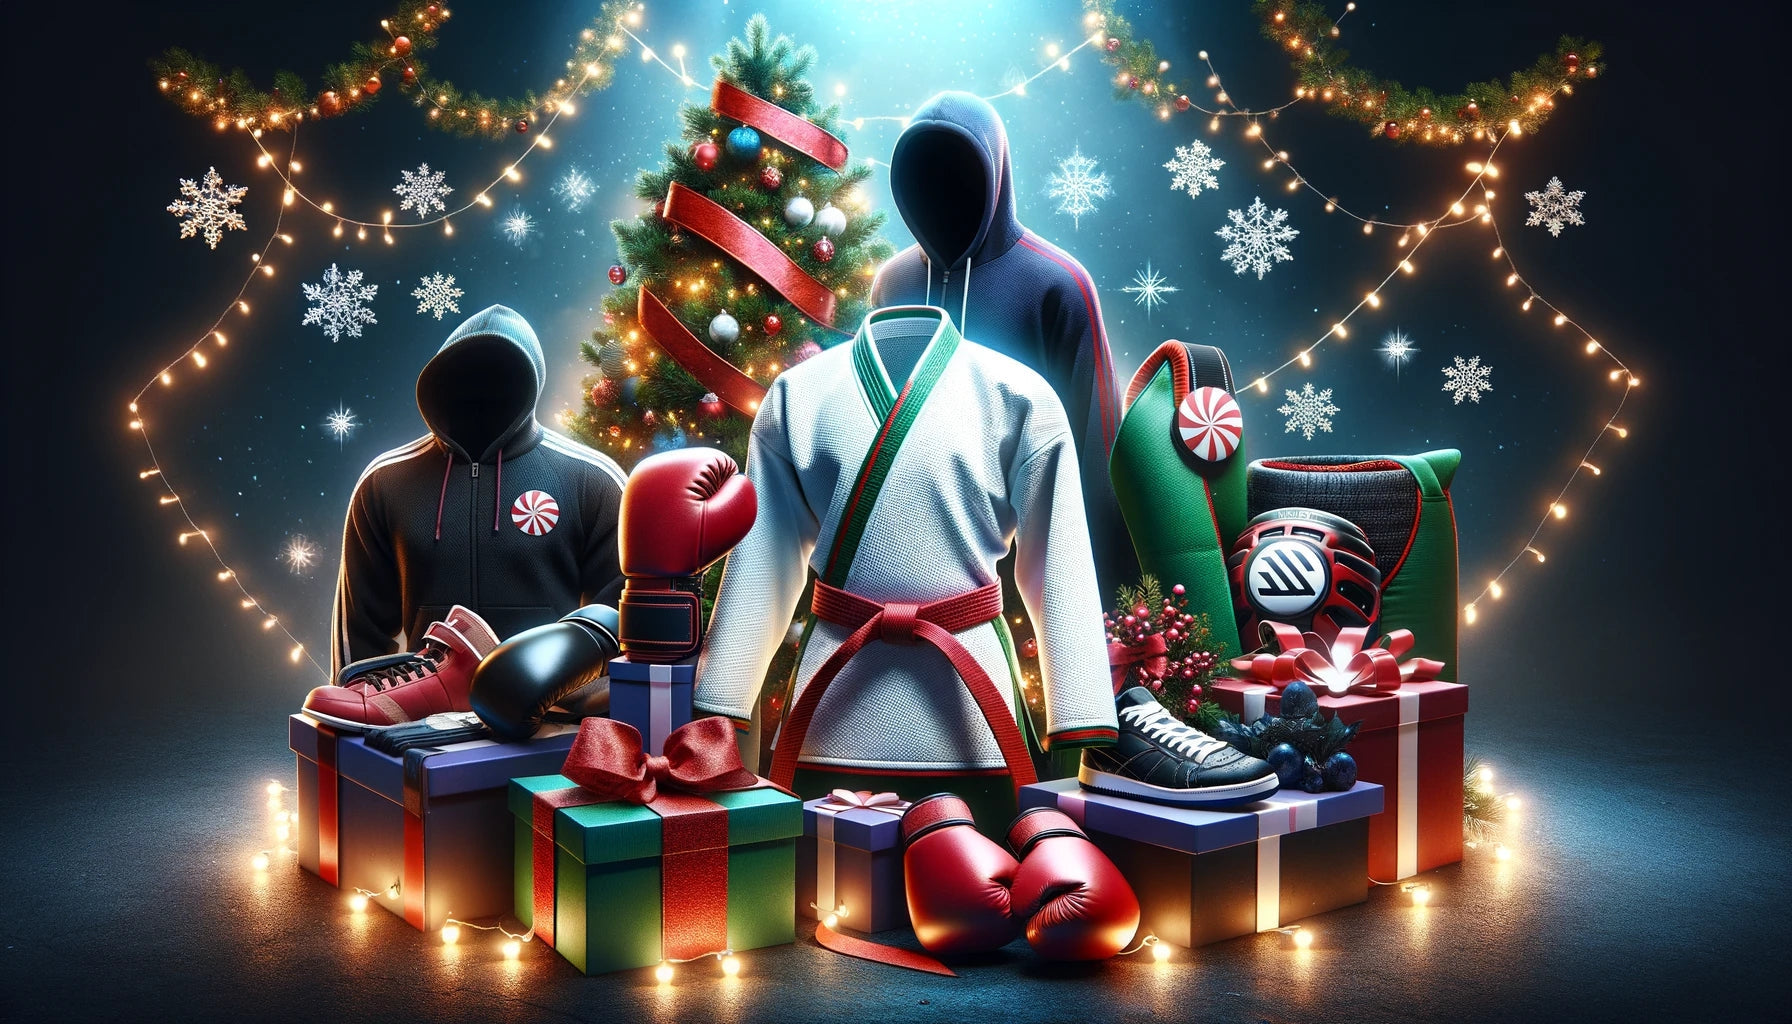 Get Your Martial Arts Gear in Time for Christmas